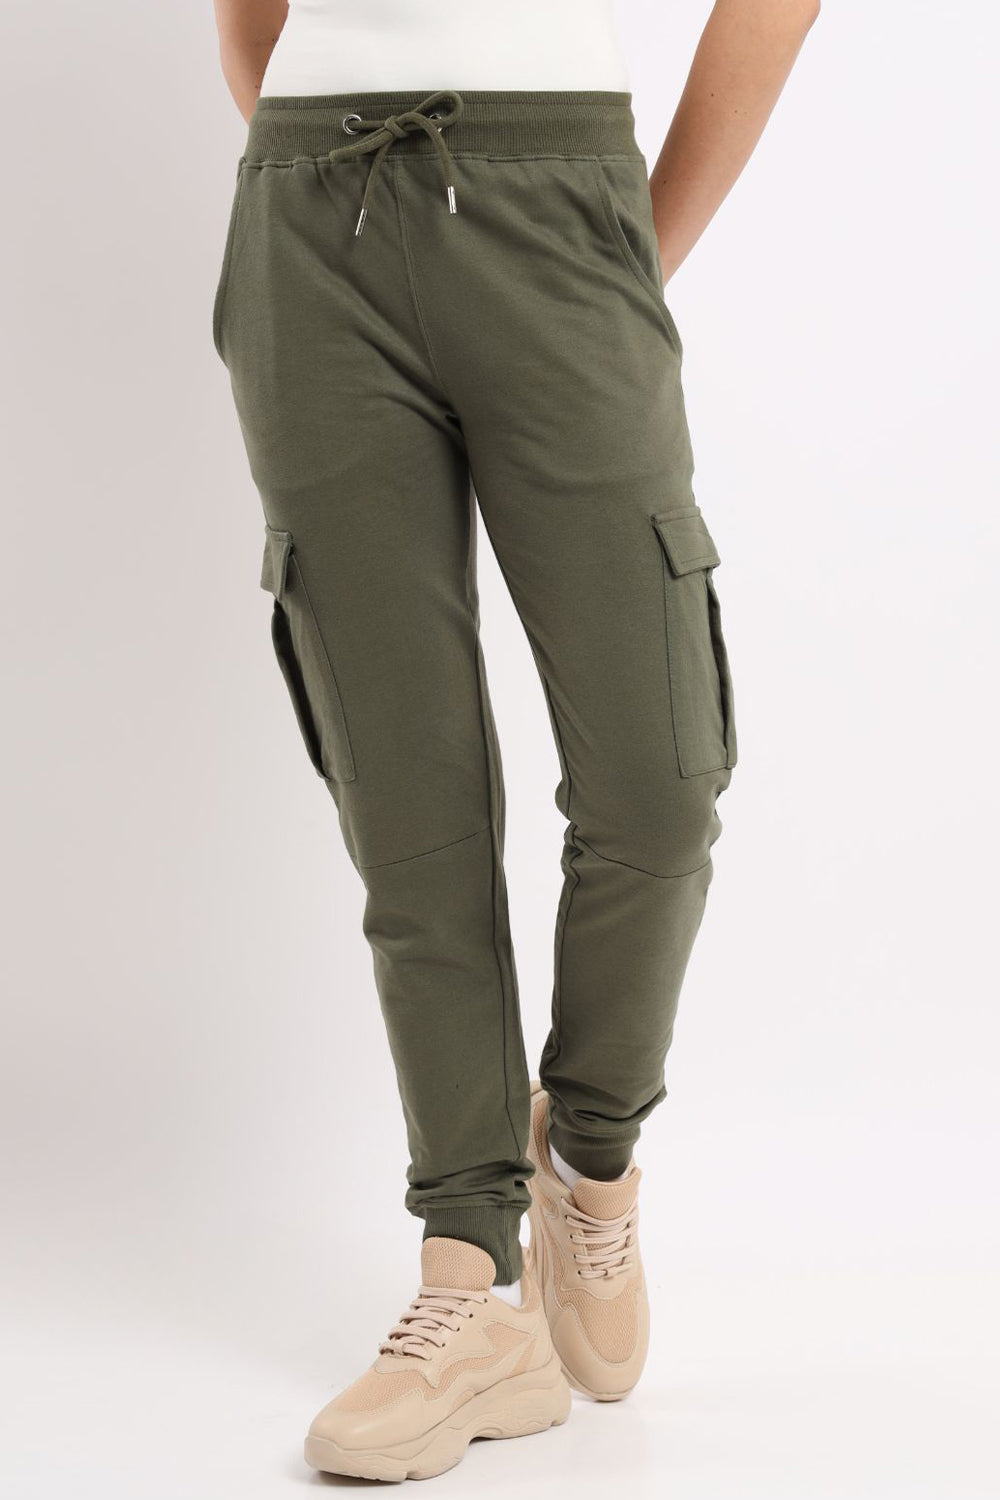 Made by Olivia Women's Lightweight Scuba Joggers with Pockets for